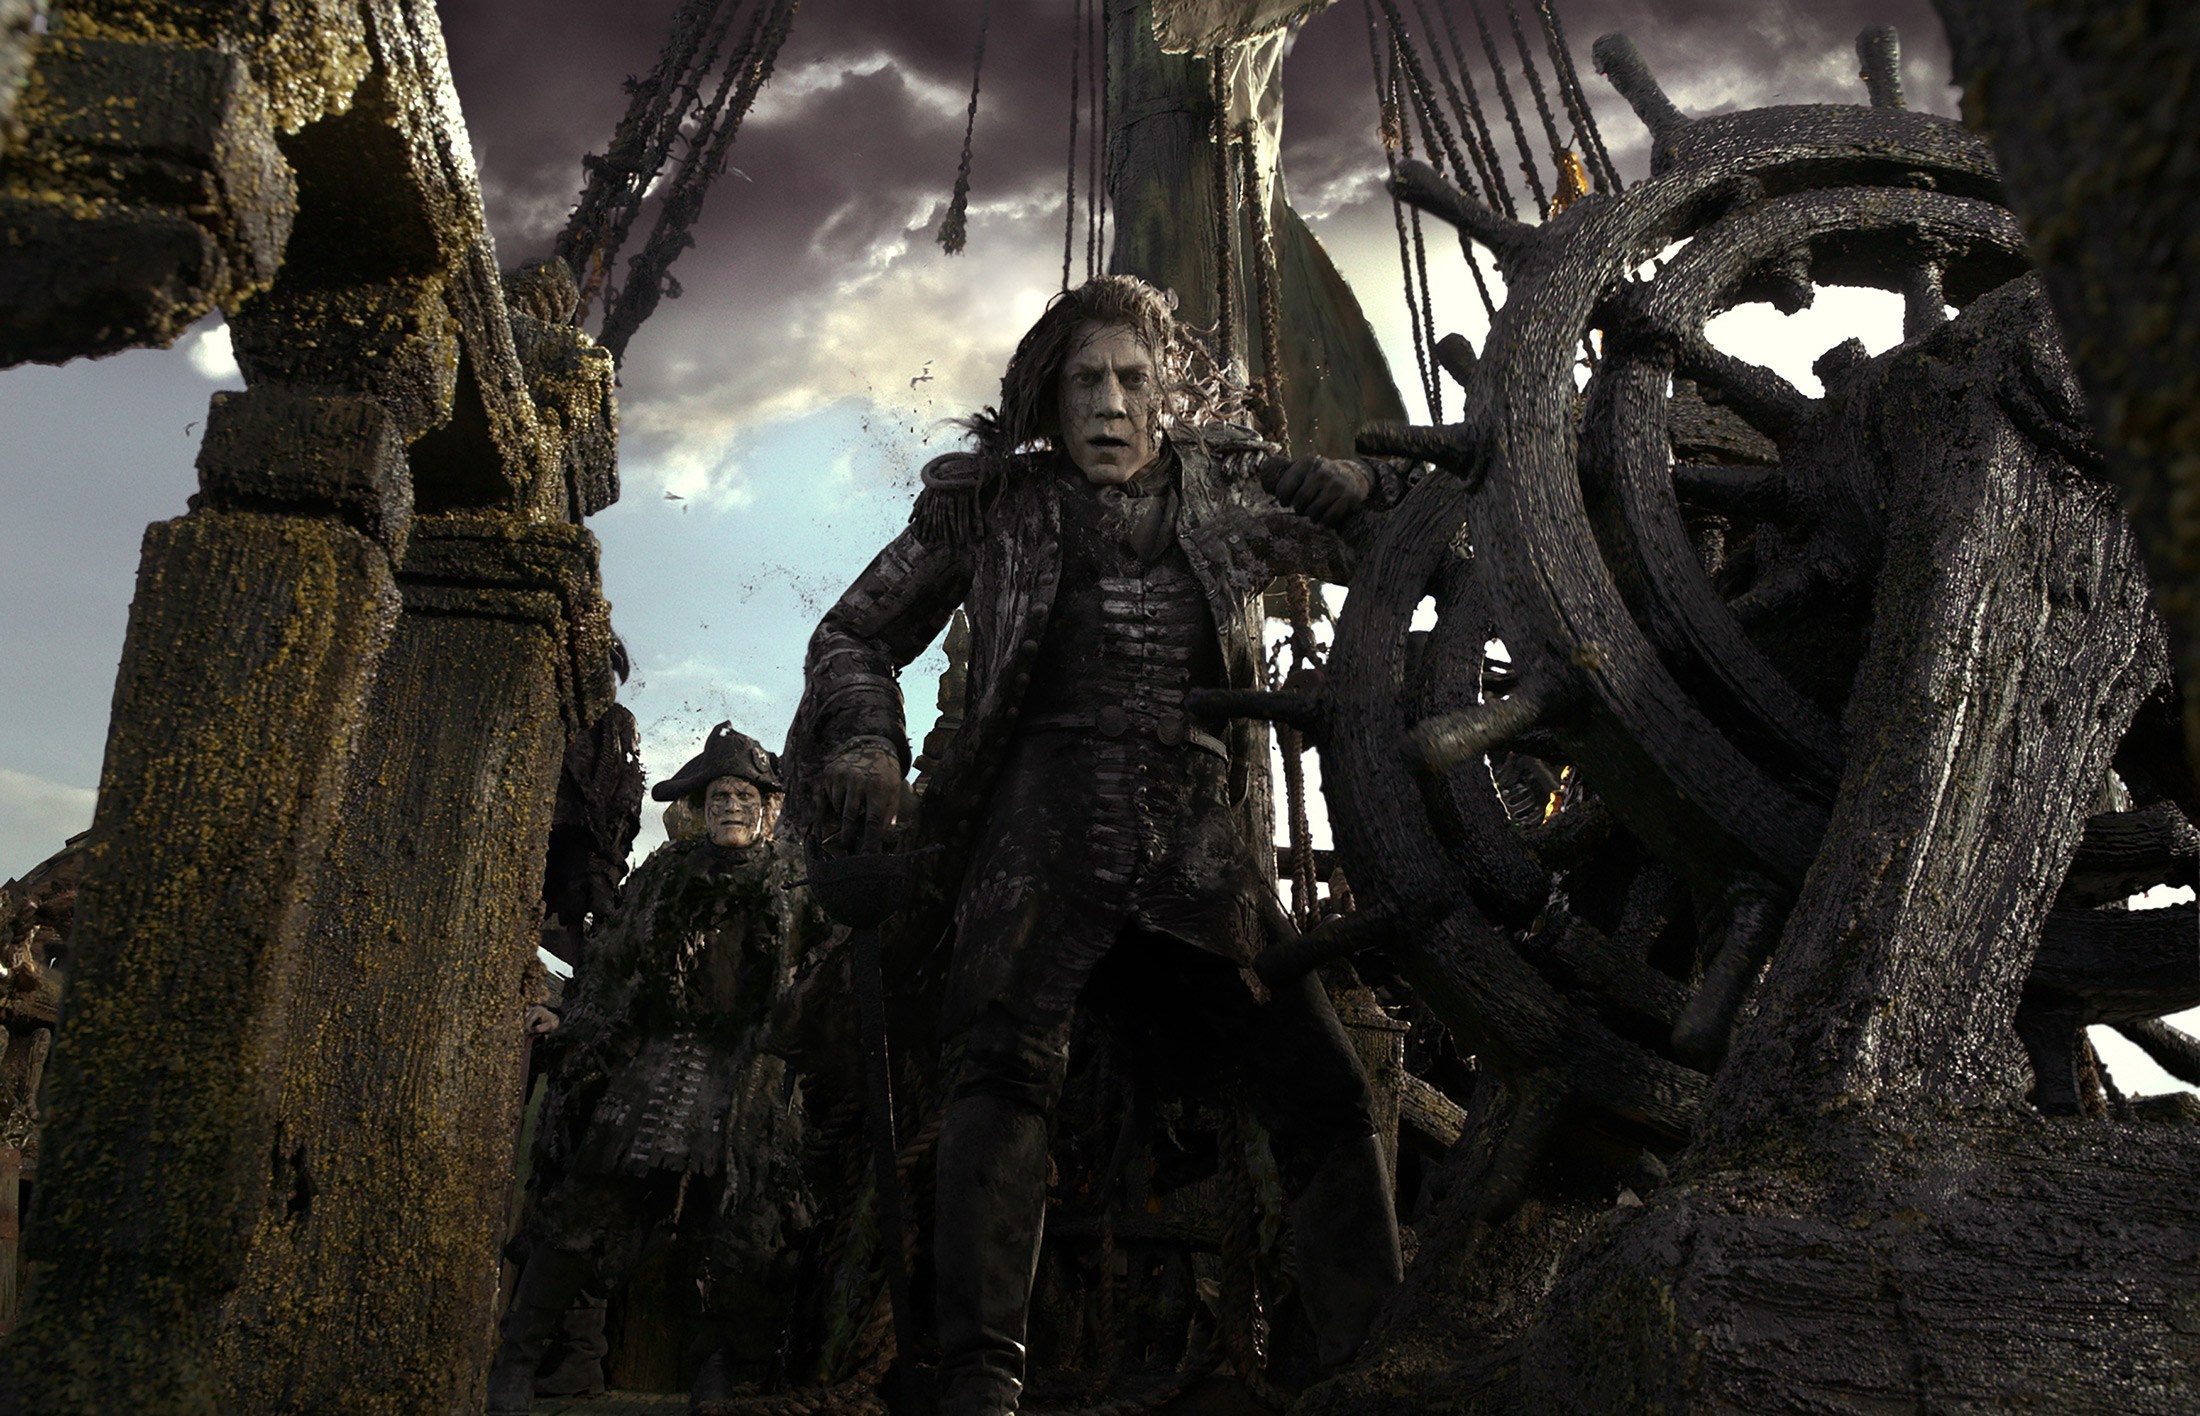 People 2200x1416 Pirates of the Caribbean: Dead Men Tell No Tales movies Pirates of the Caribbean Javier Bardem